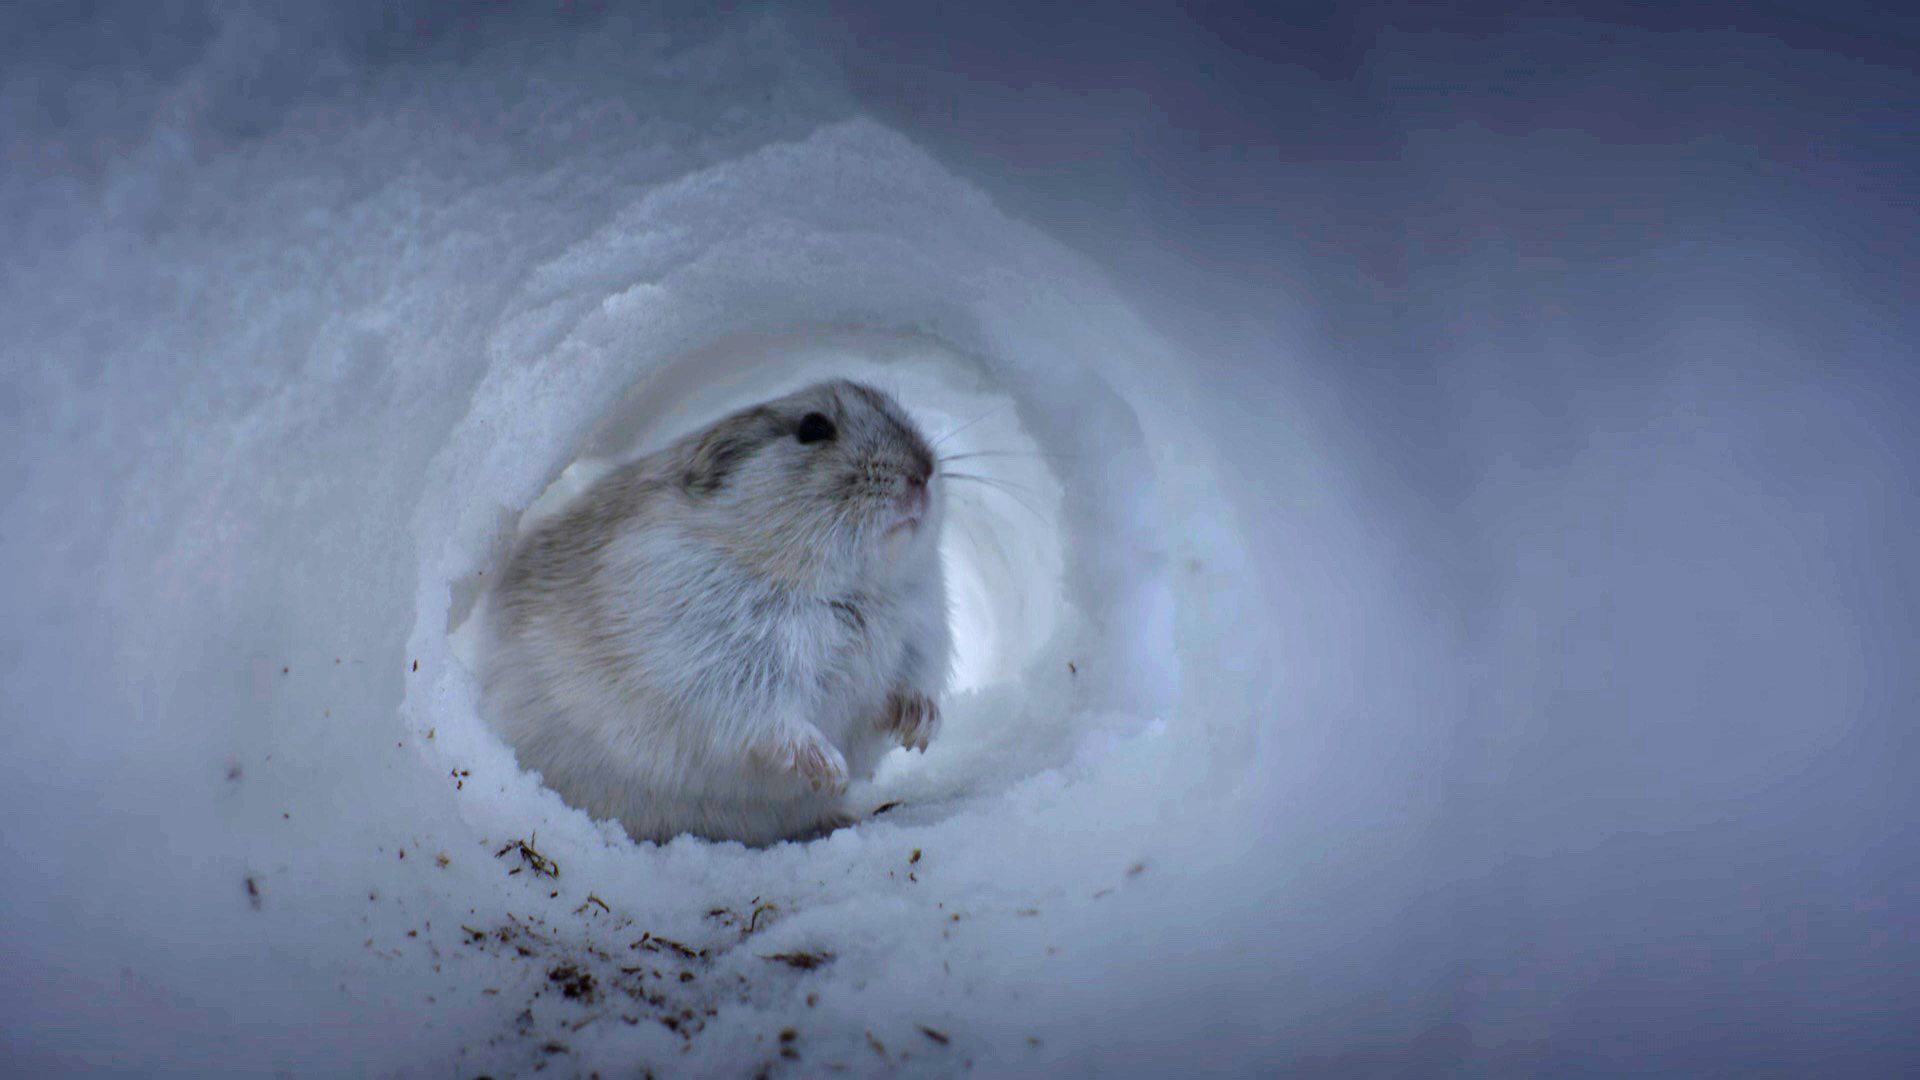 How is climate change affecting the Arctic's smallest mammal, the lemming?  